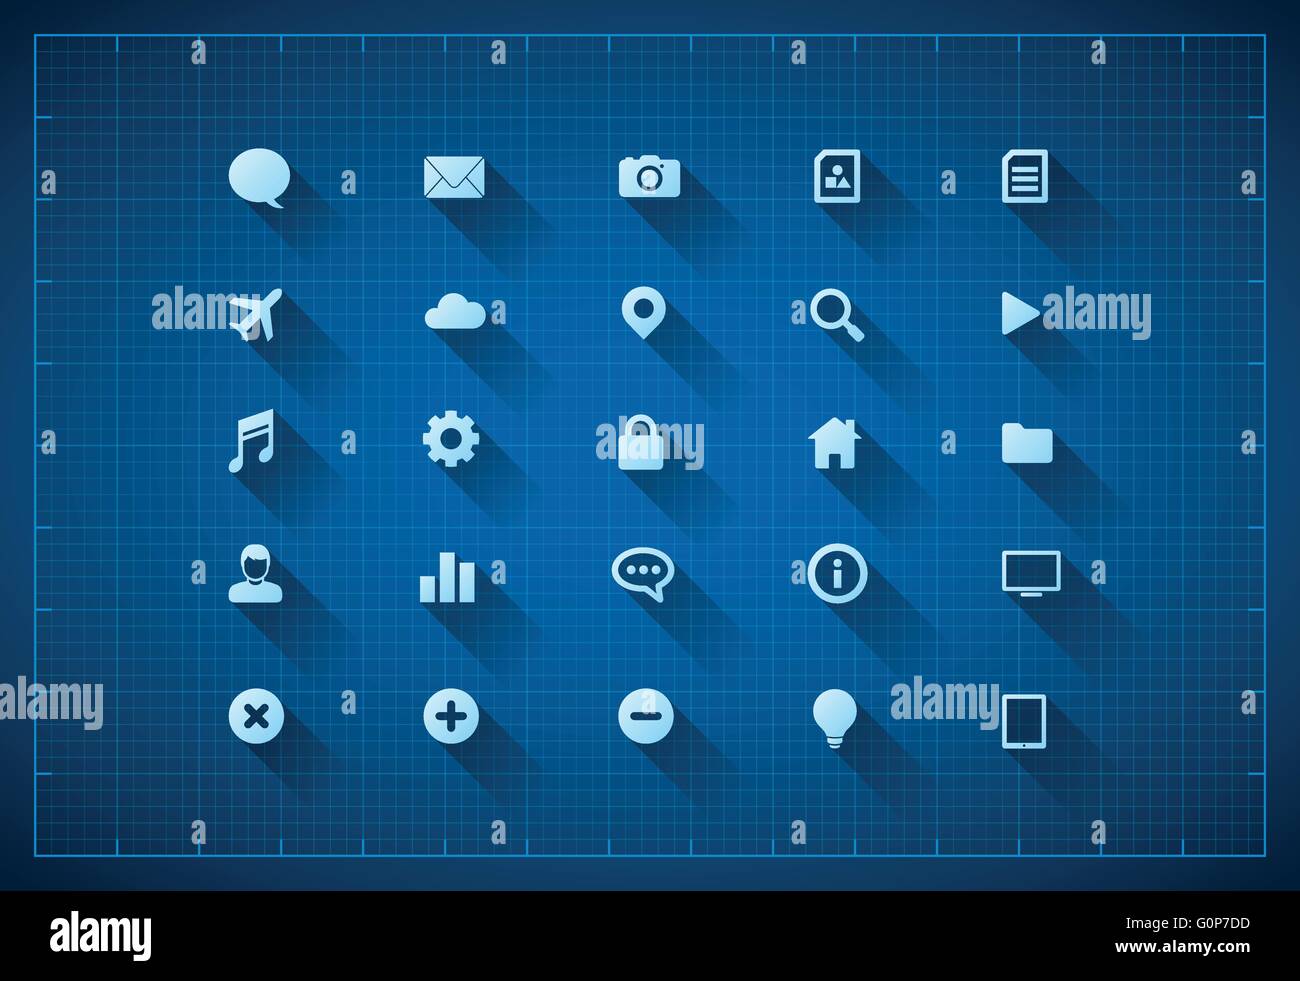 Vector flat long shadow icon set on blueprint background. Stock Vector